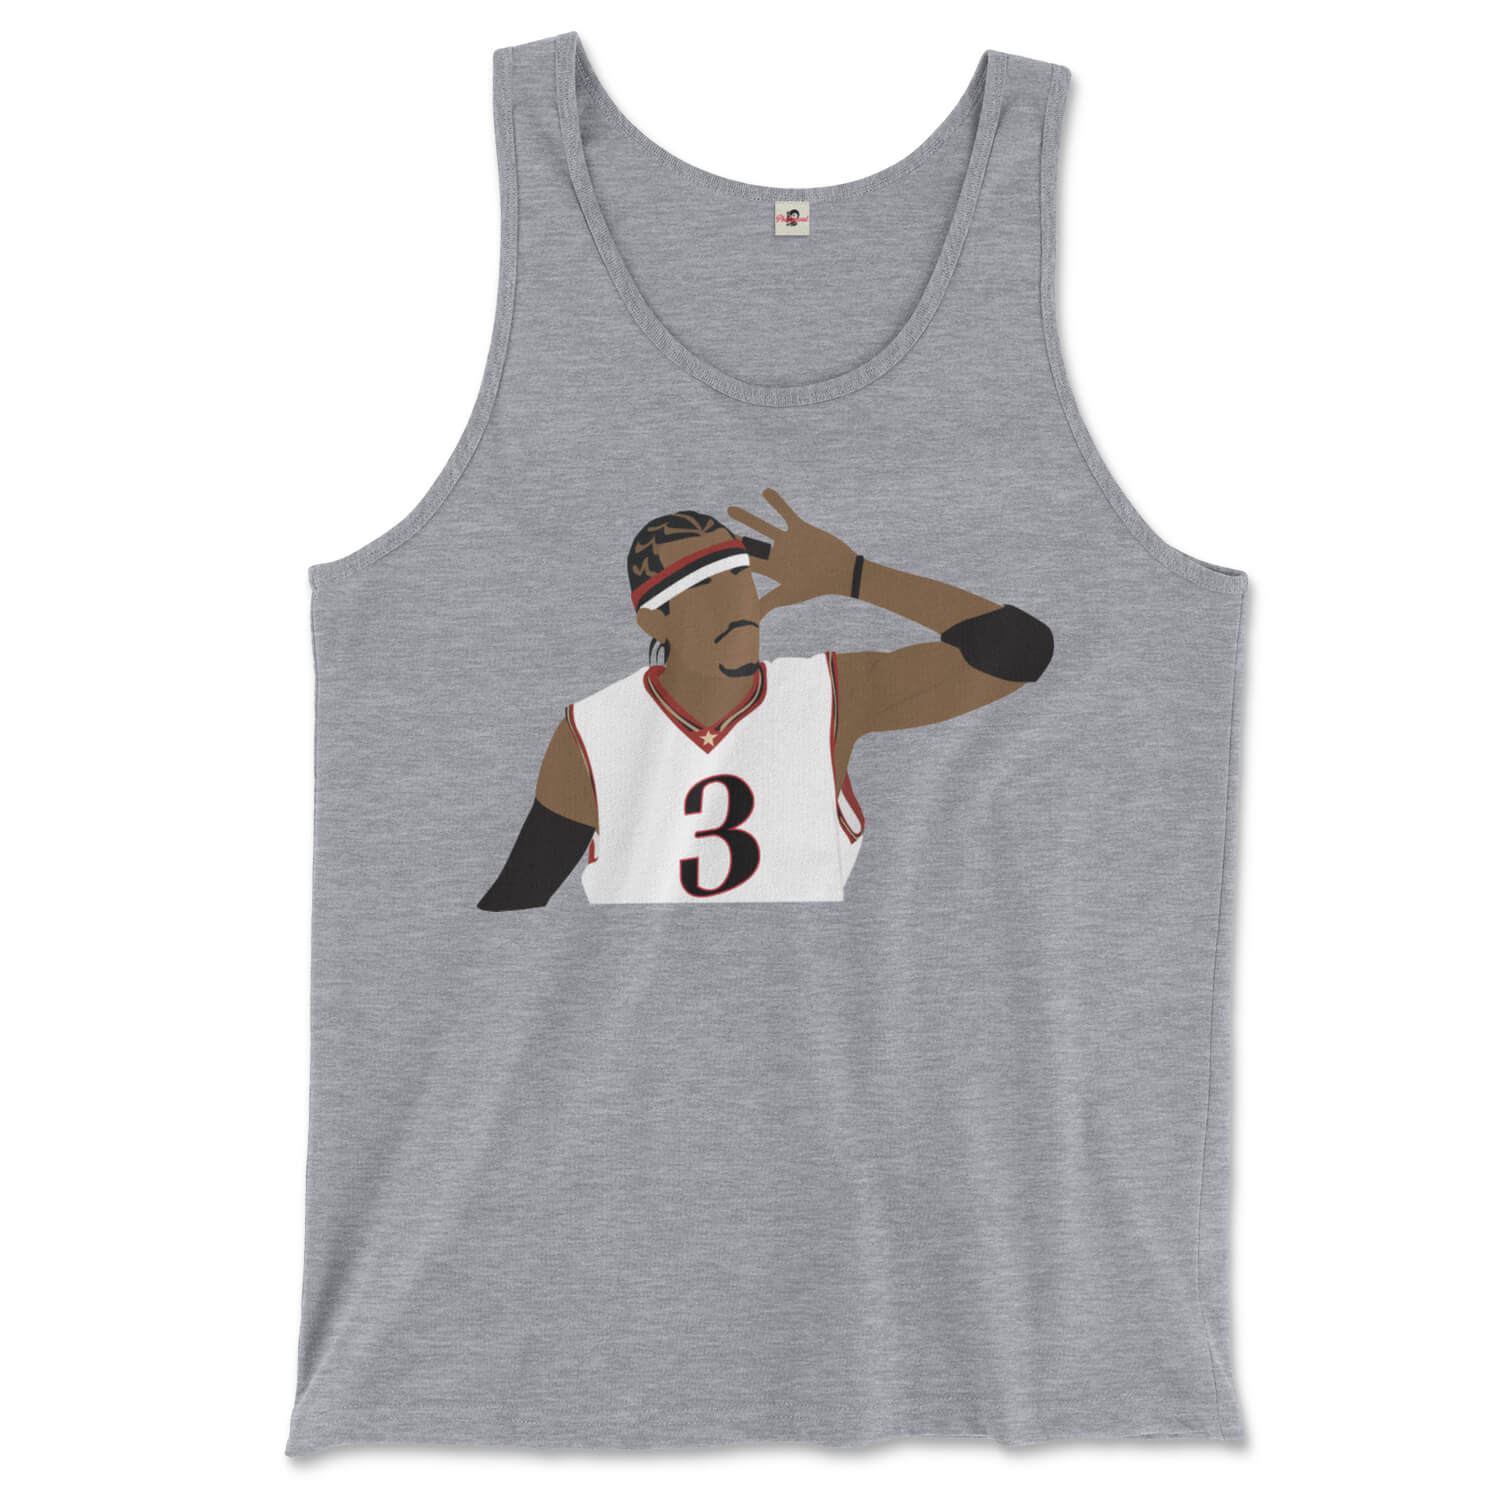 Philadelphia 76ers Allen Iverson the Answer on a heather grey Sixers tank top from Phillygoat